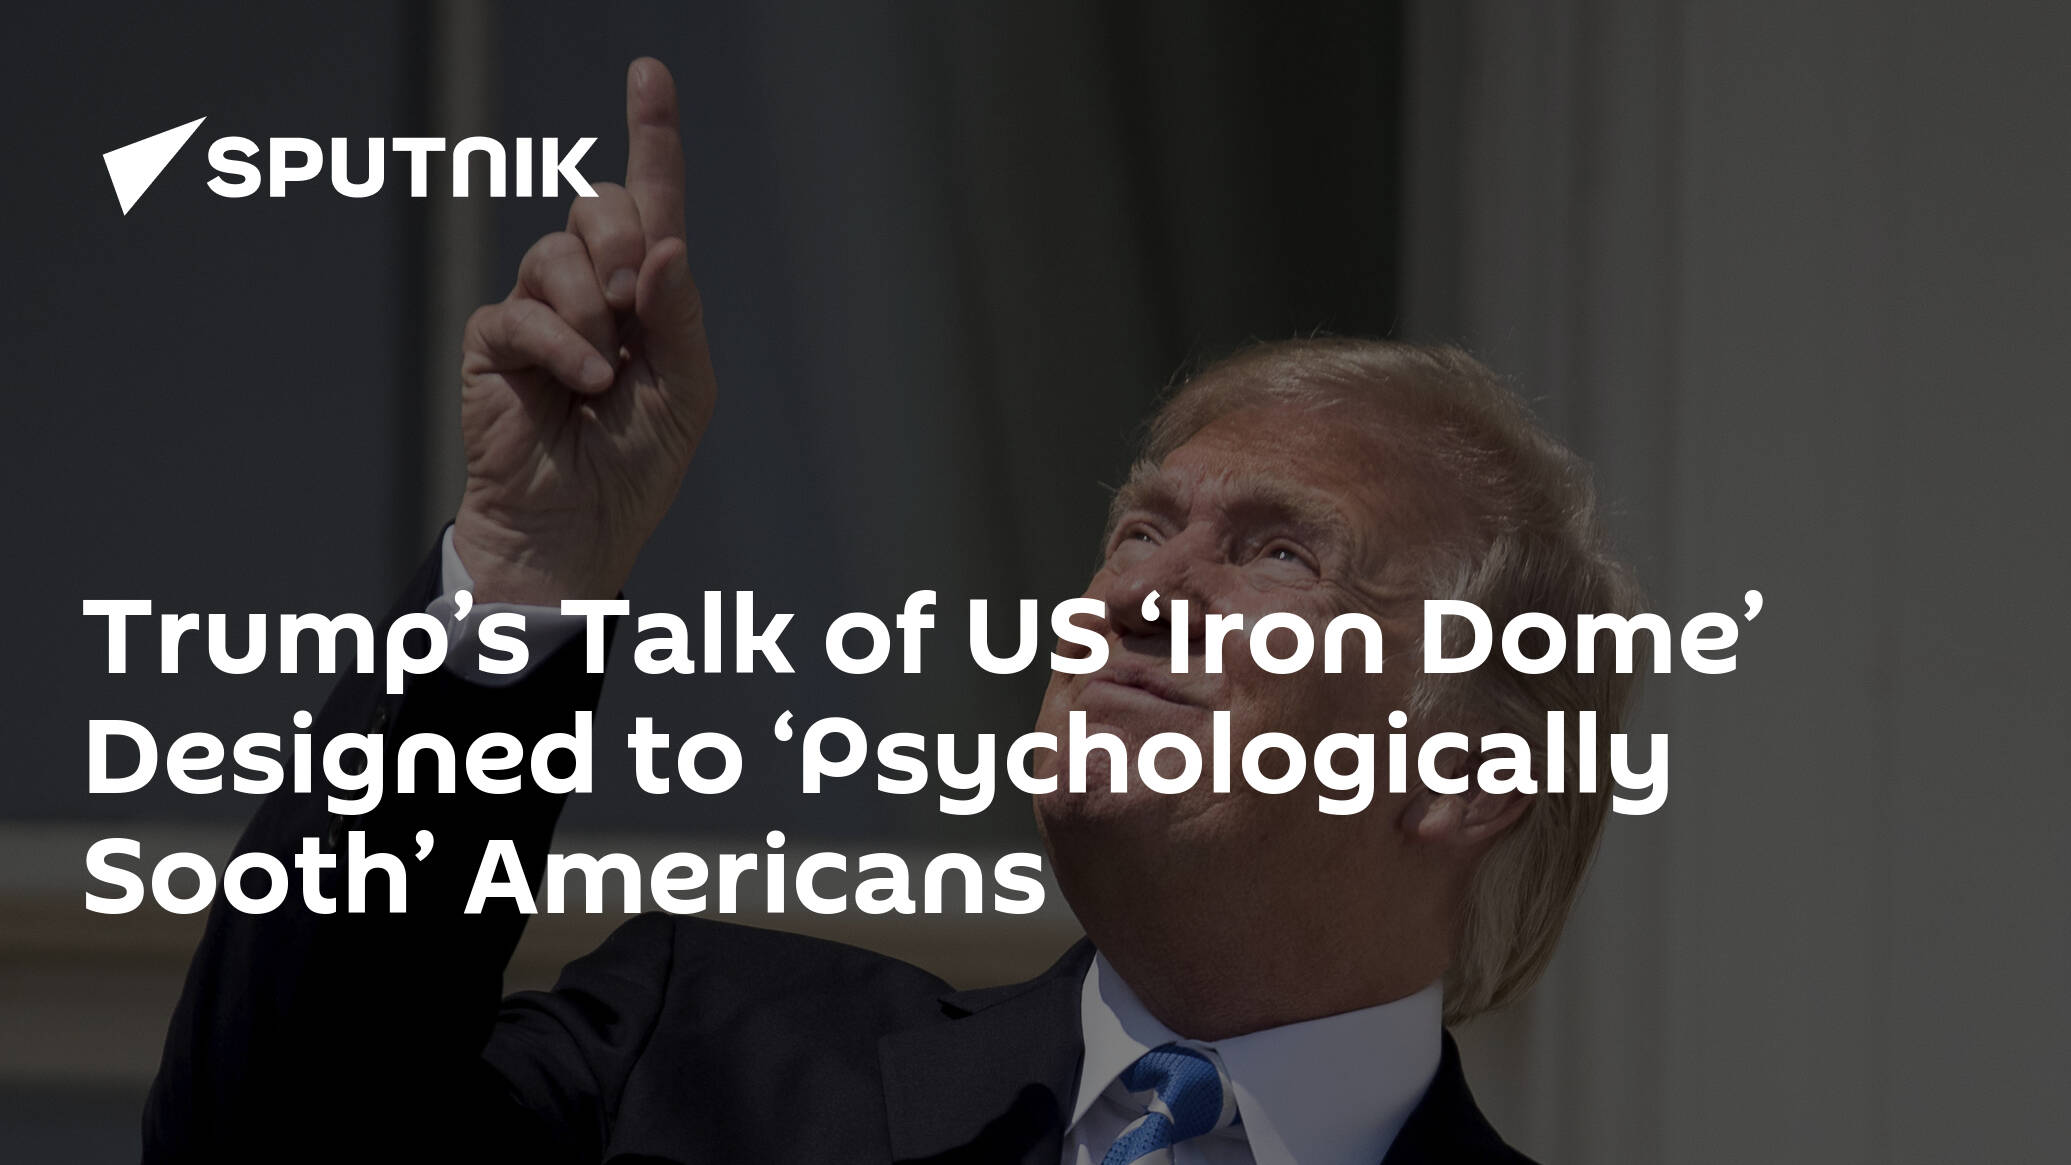 Trump’s Talk of US ‘Iron Dome’ Designed to ‘Psychologically Sooth’ Americans